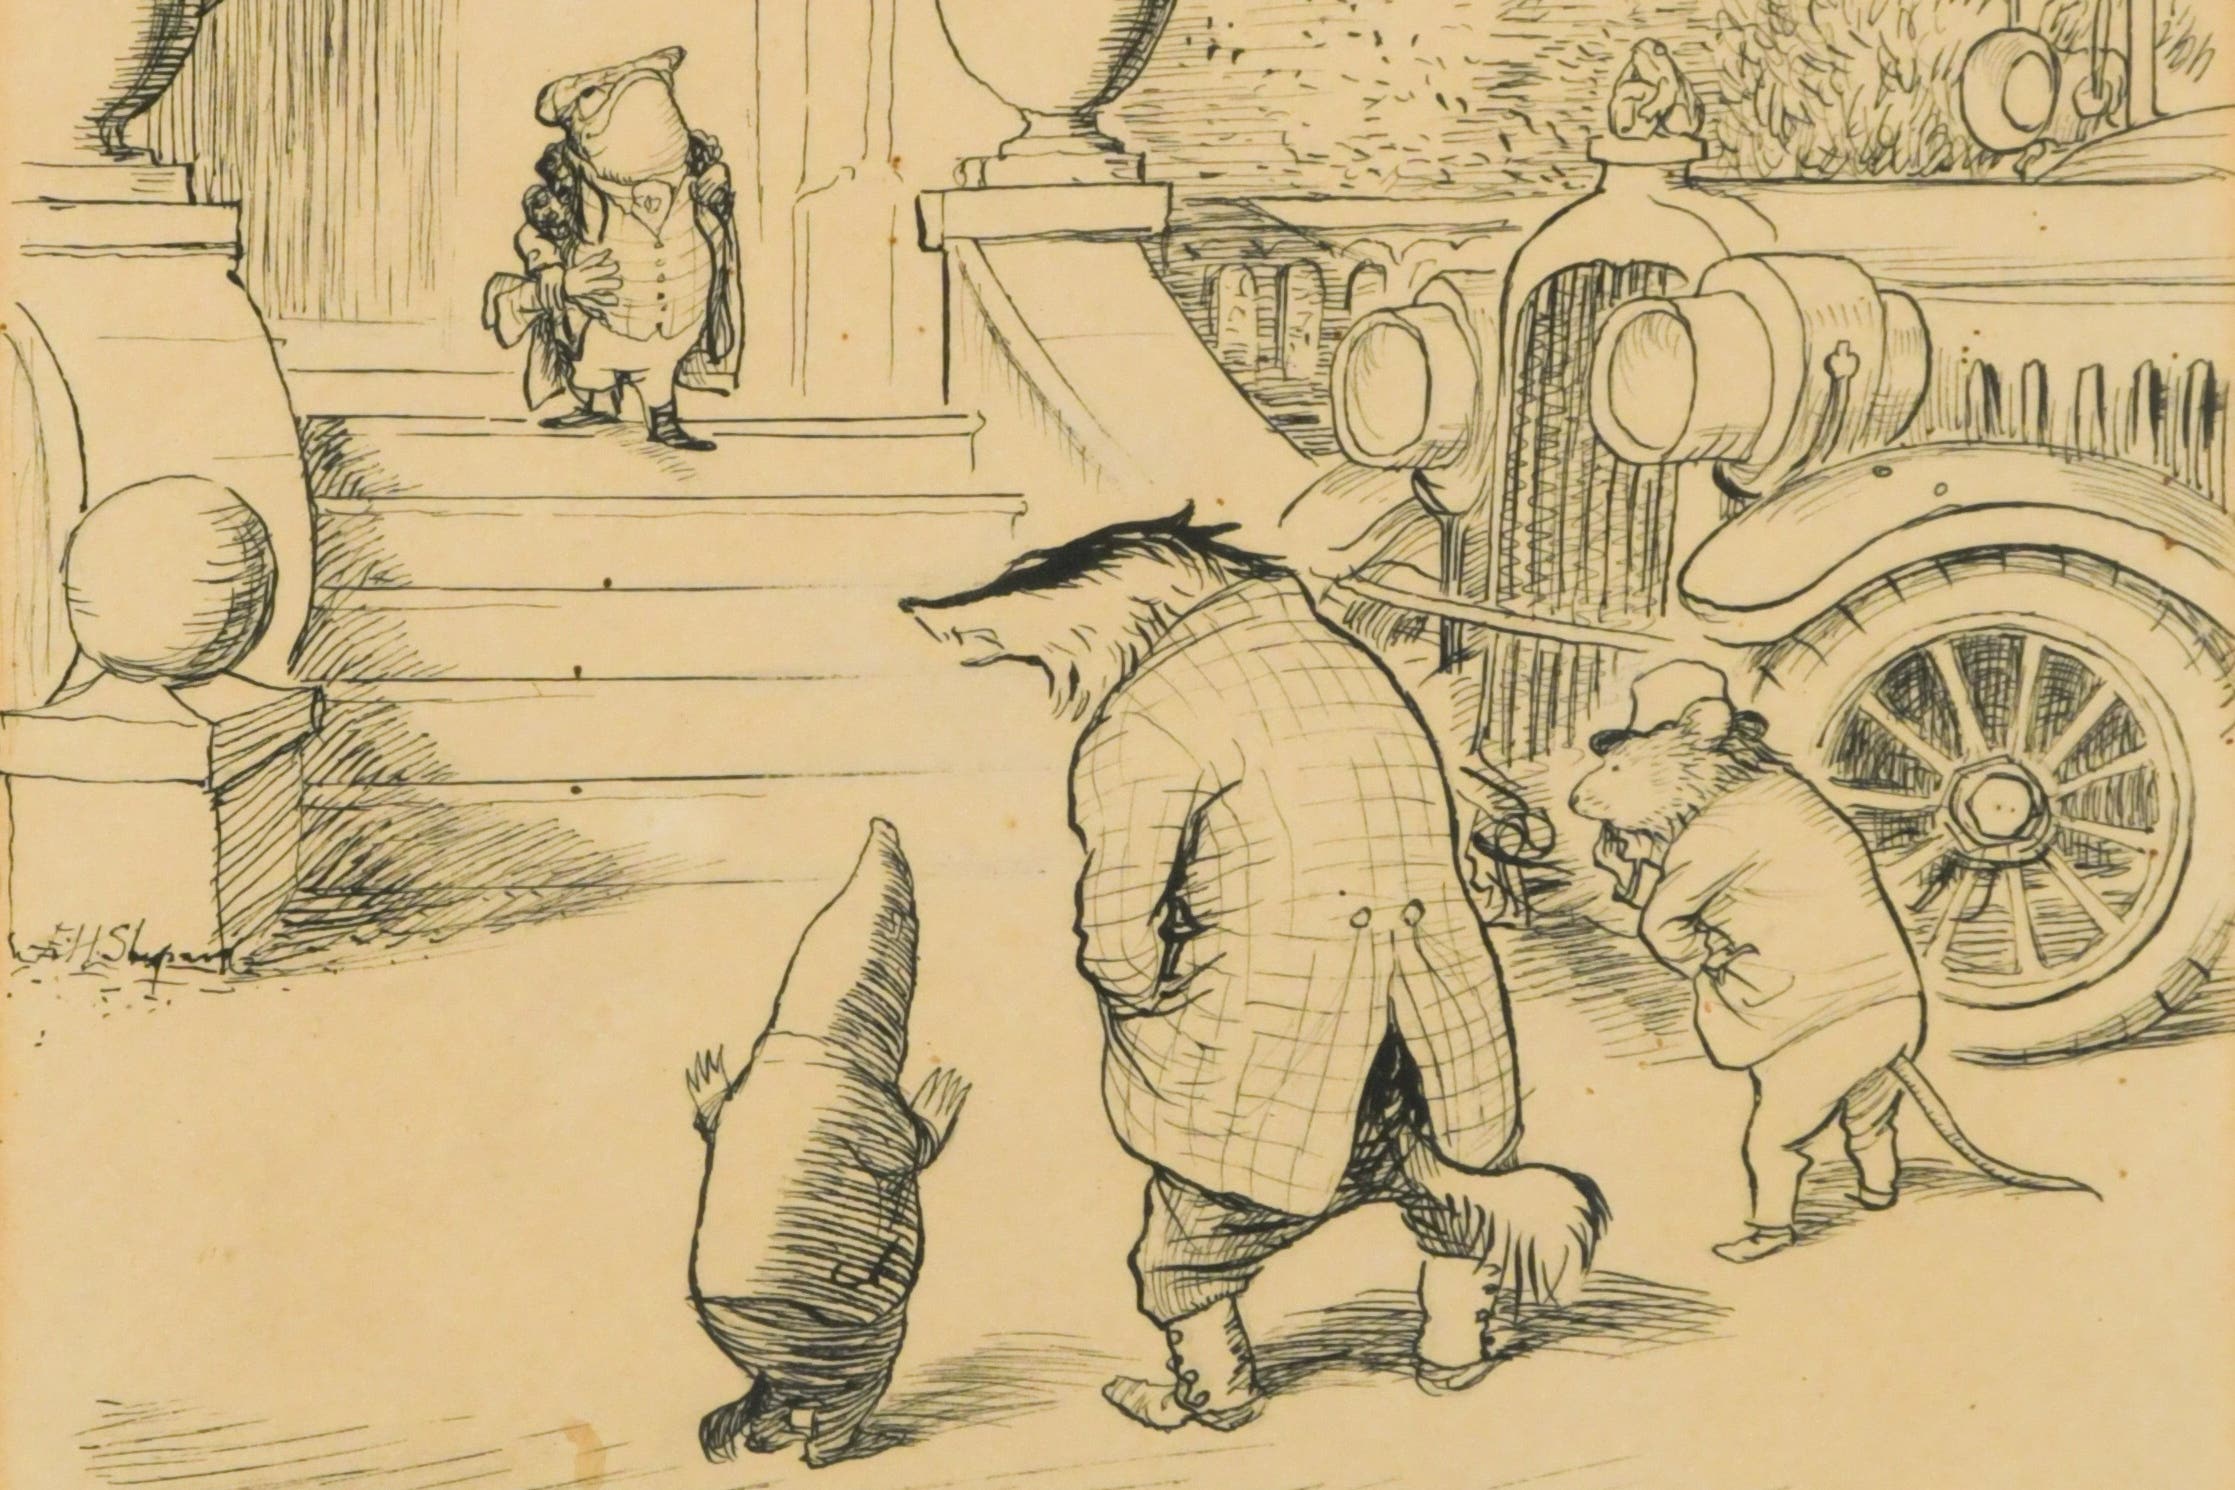 the wind in the willows toad hall